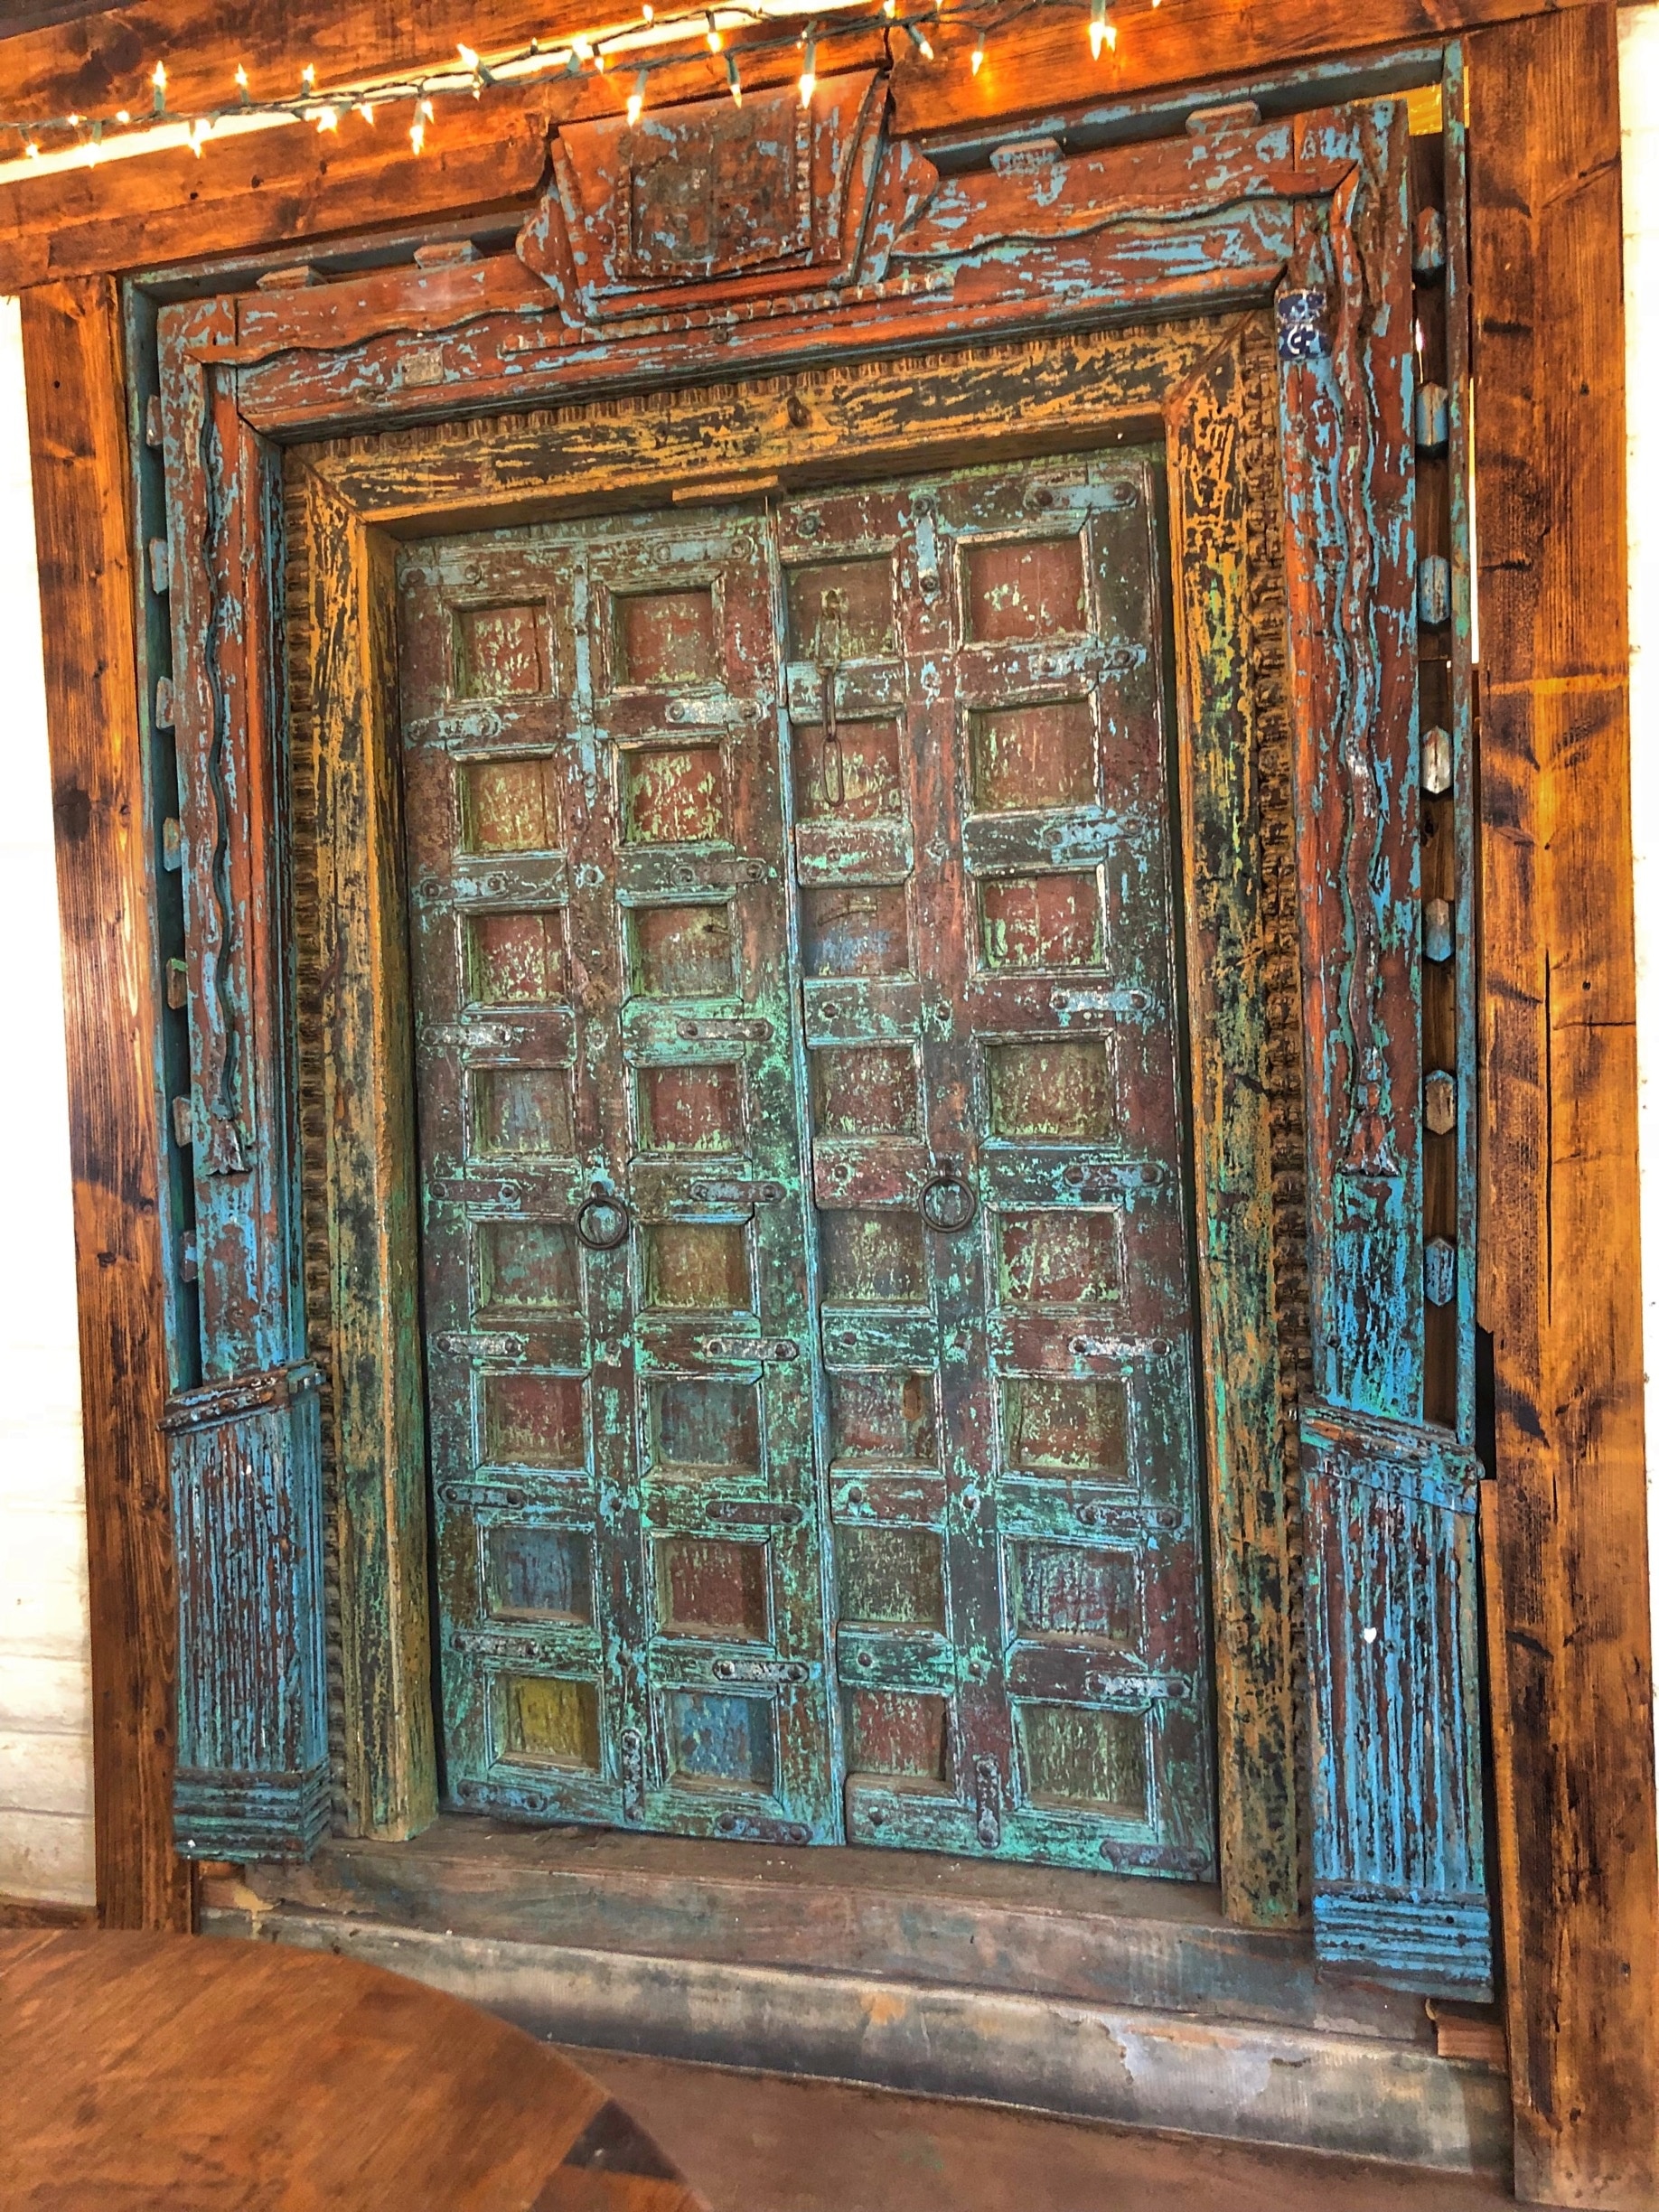 This amazing door was at the winery we went to. I should have asked about the story on this.